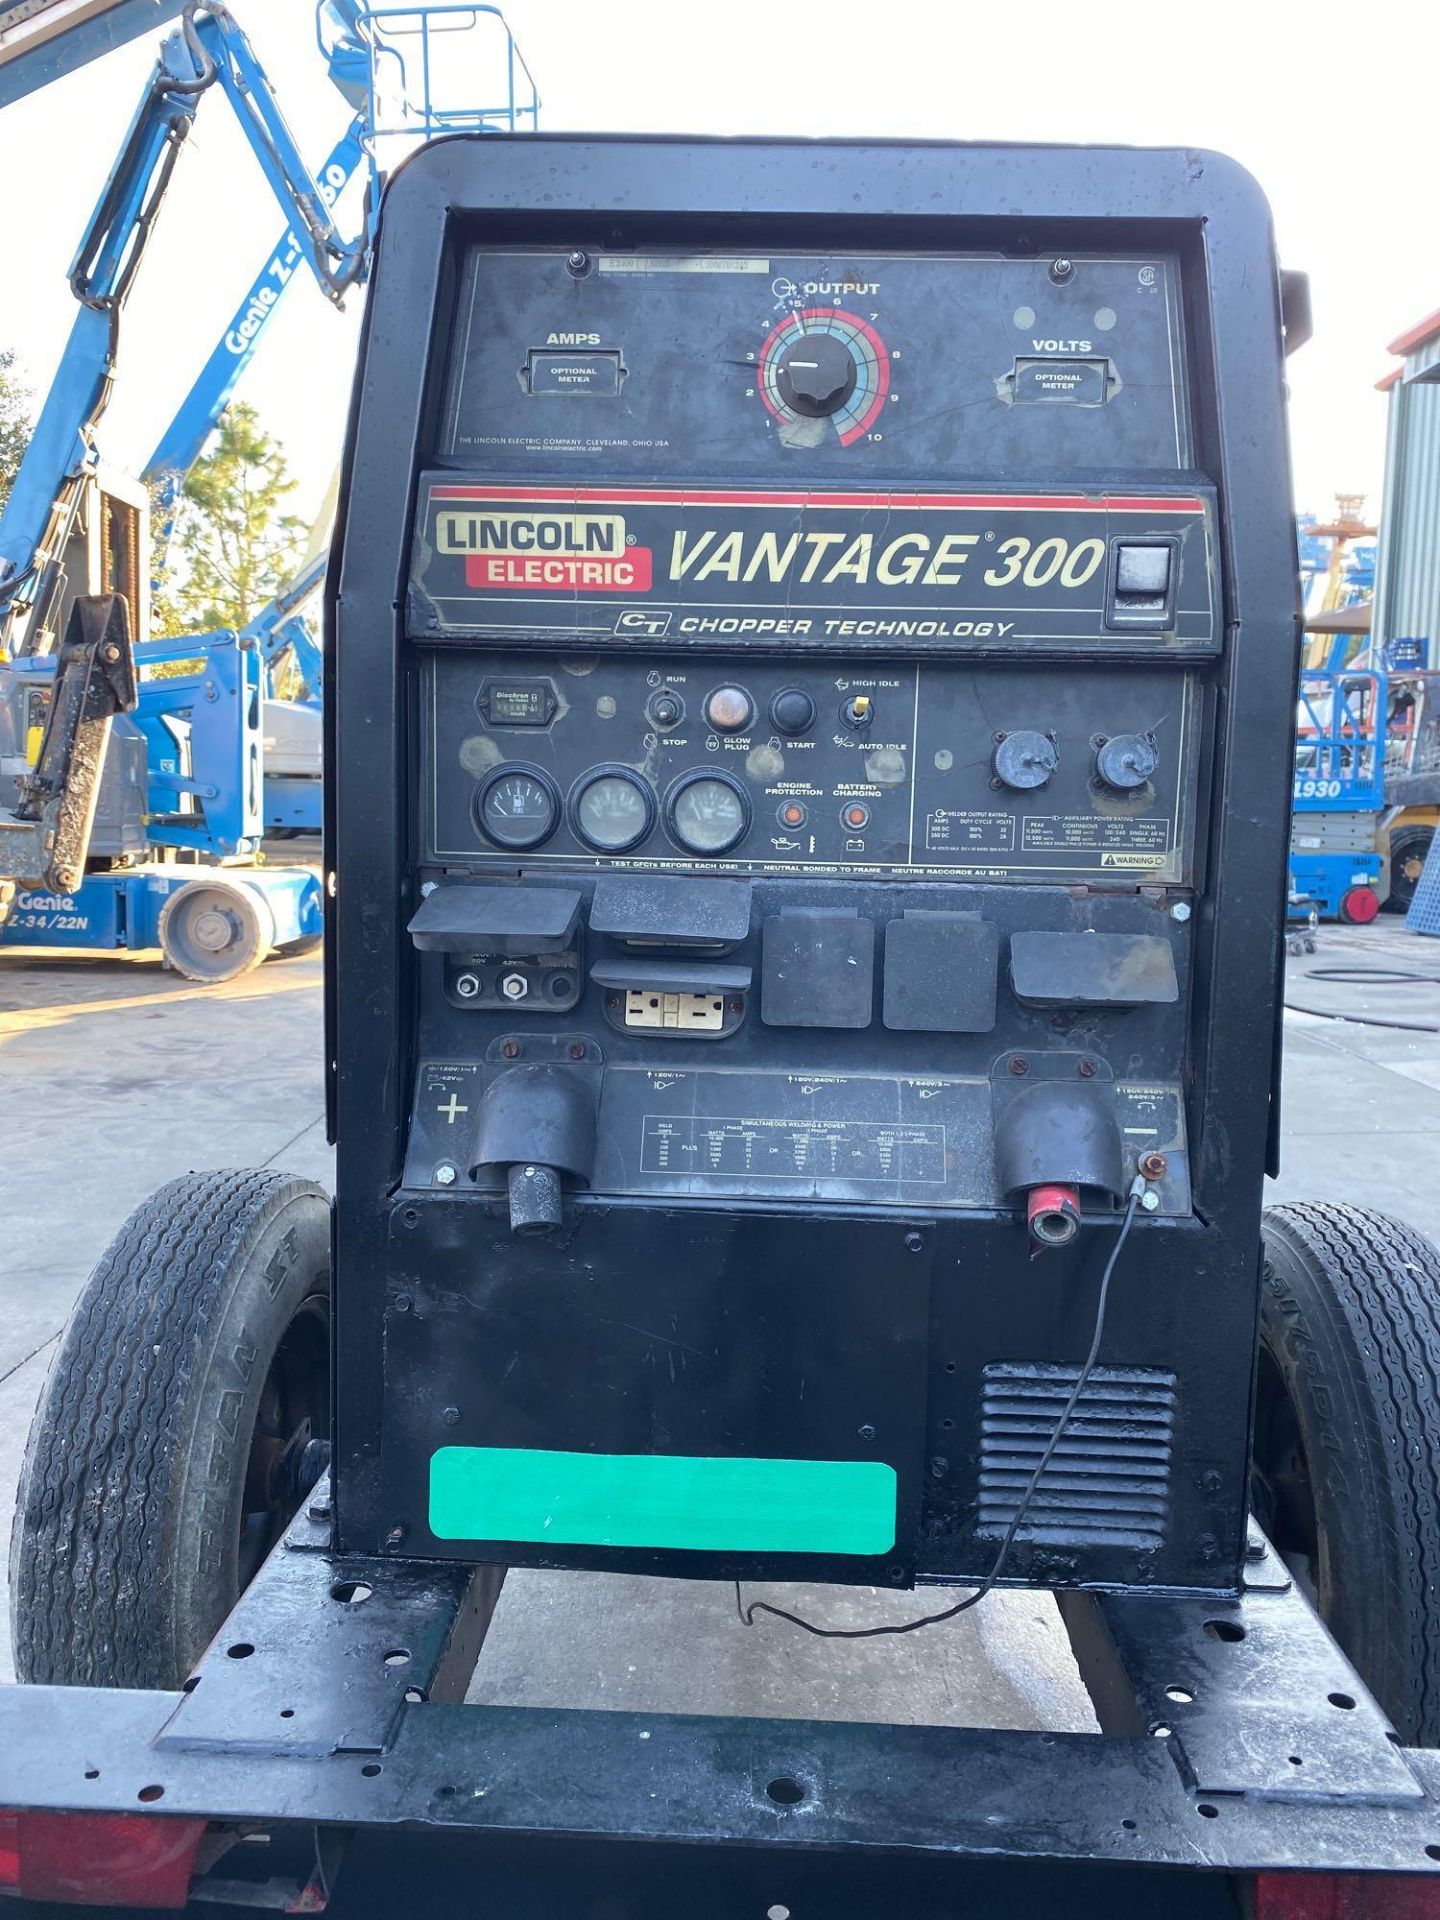 LINCOLN ELECTRIC VANTAGE 300 TRAILER MOUNTED DIESEL WELDER, RUNS AND OPERATES - Image 5 of 5